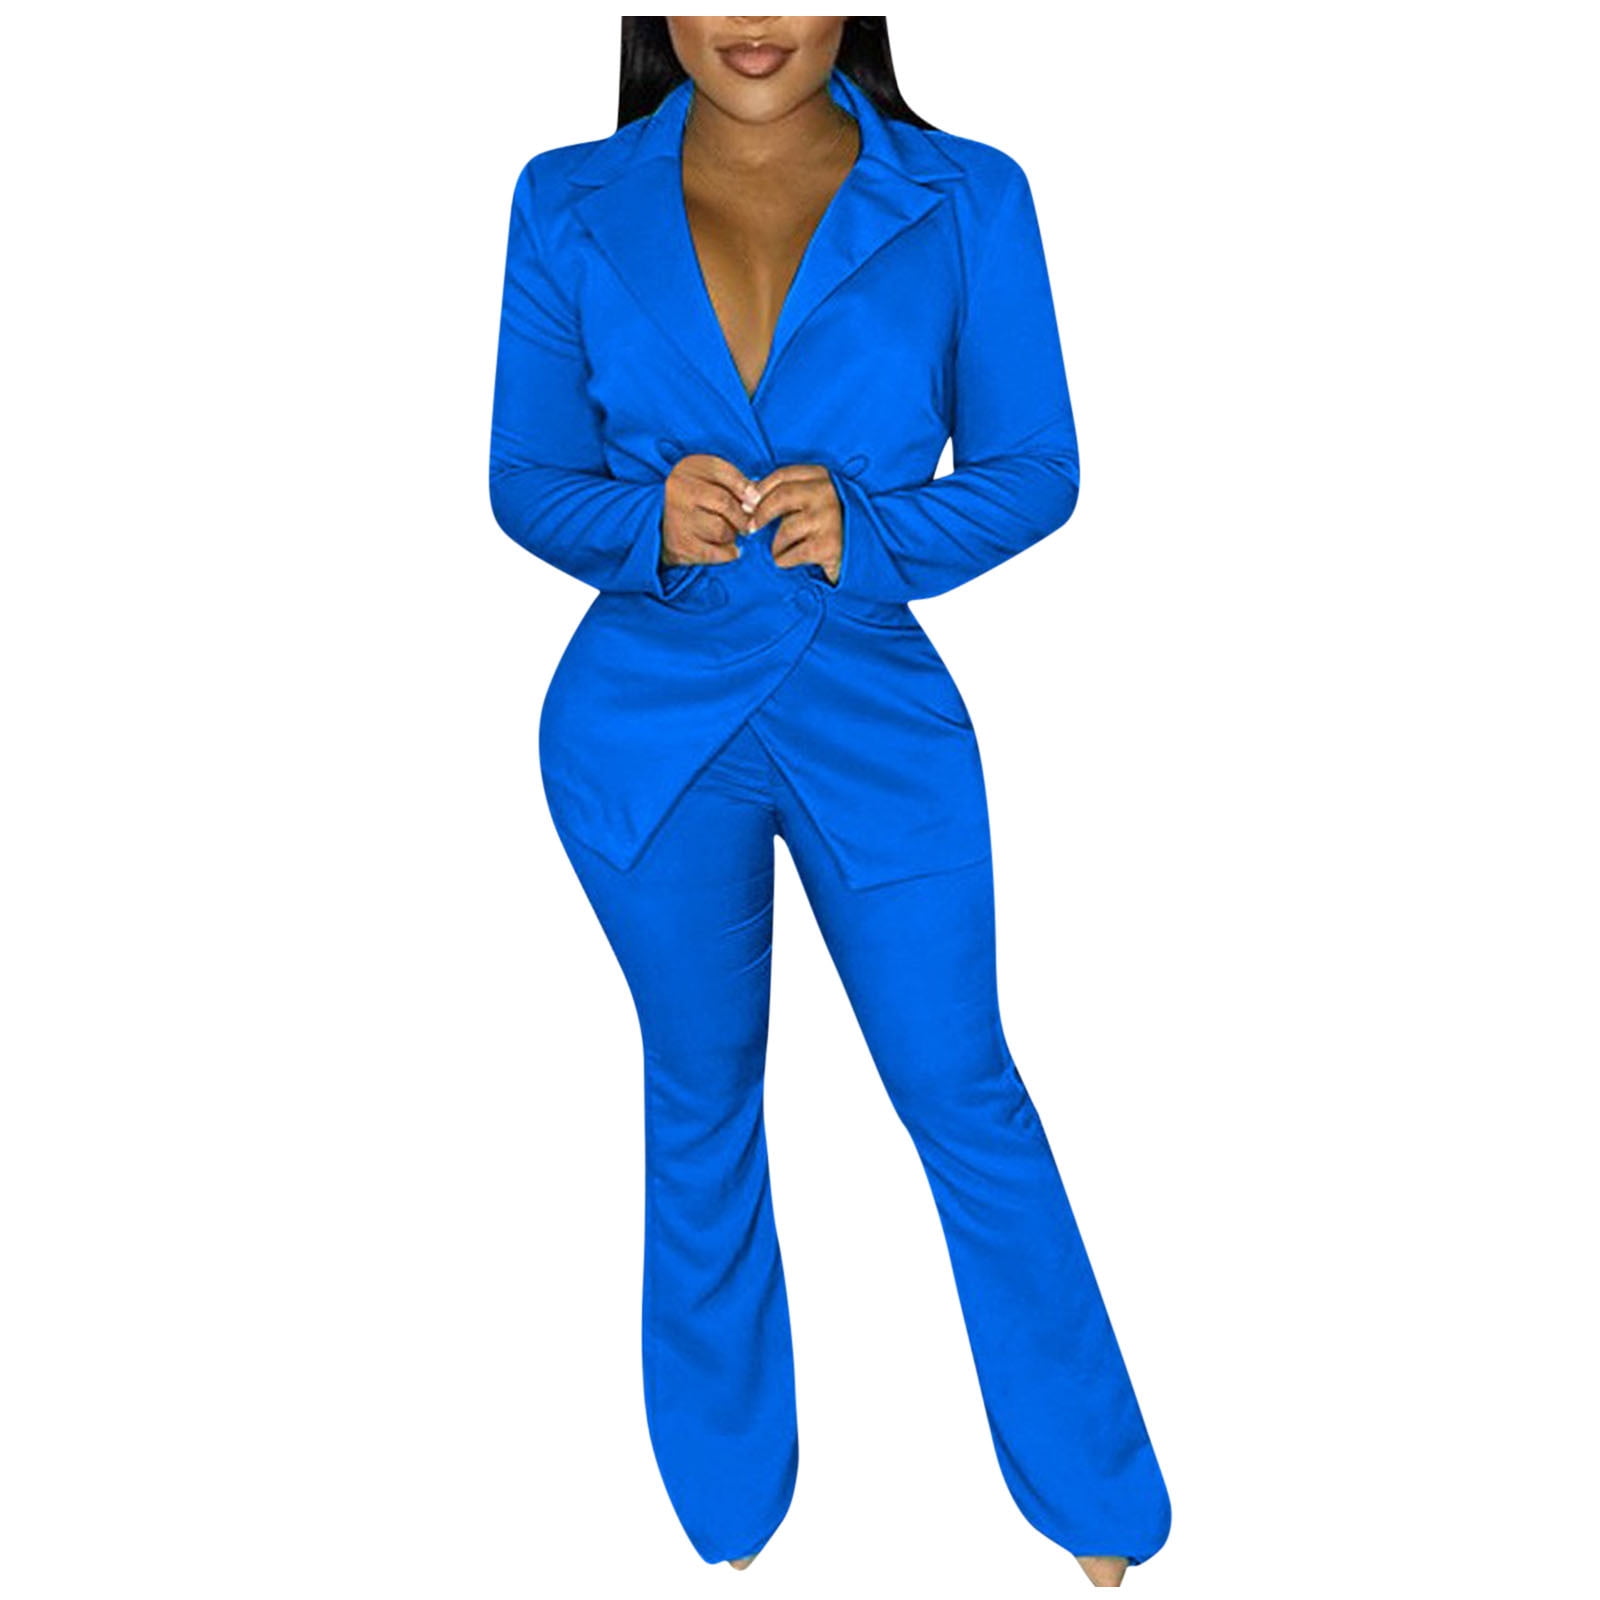 qolati Women's Sexy Business Suit Slim Fit V Neck Blazer Jacket with Bell  Bottomed Pants Sets Casual Elegant Office 2 Piece Outfits 